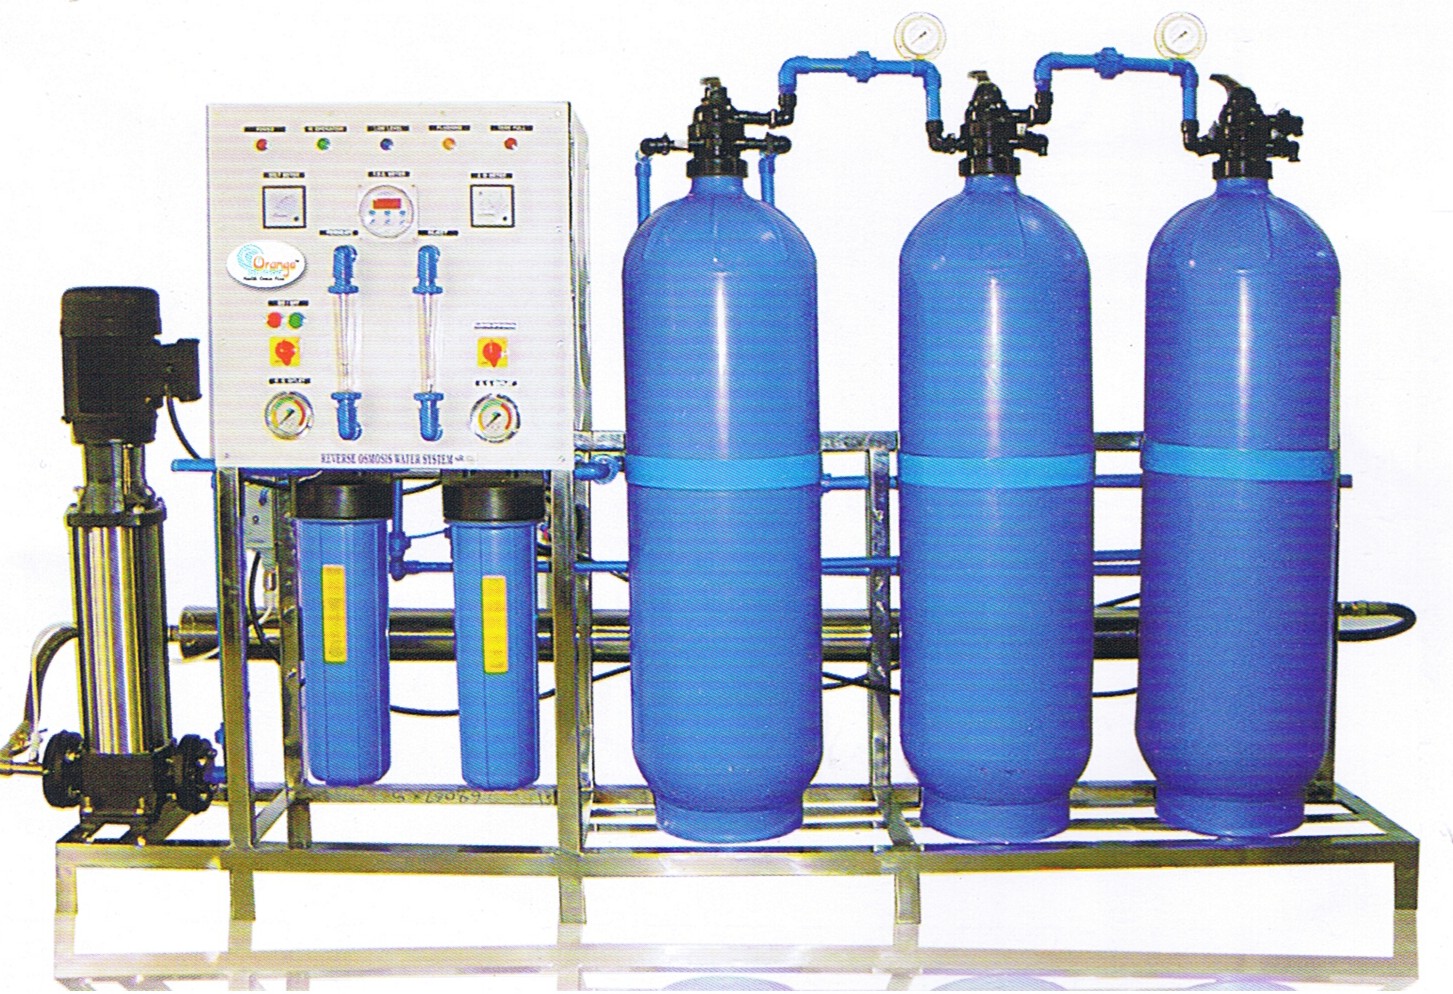 Commerfcial Water Treatment Plant - Small Scale